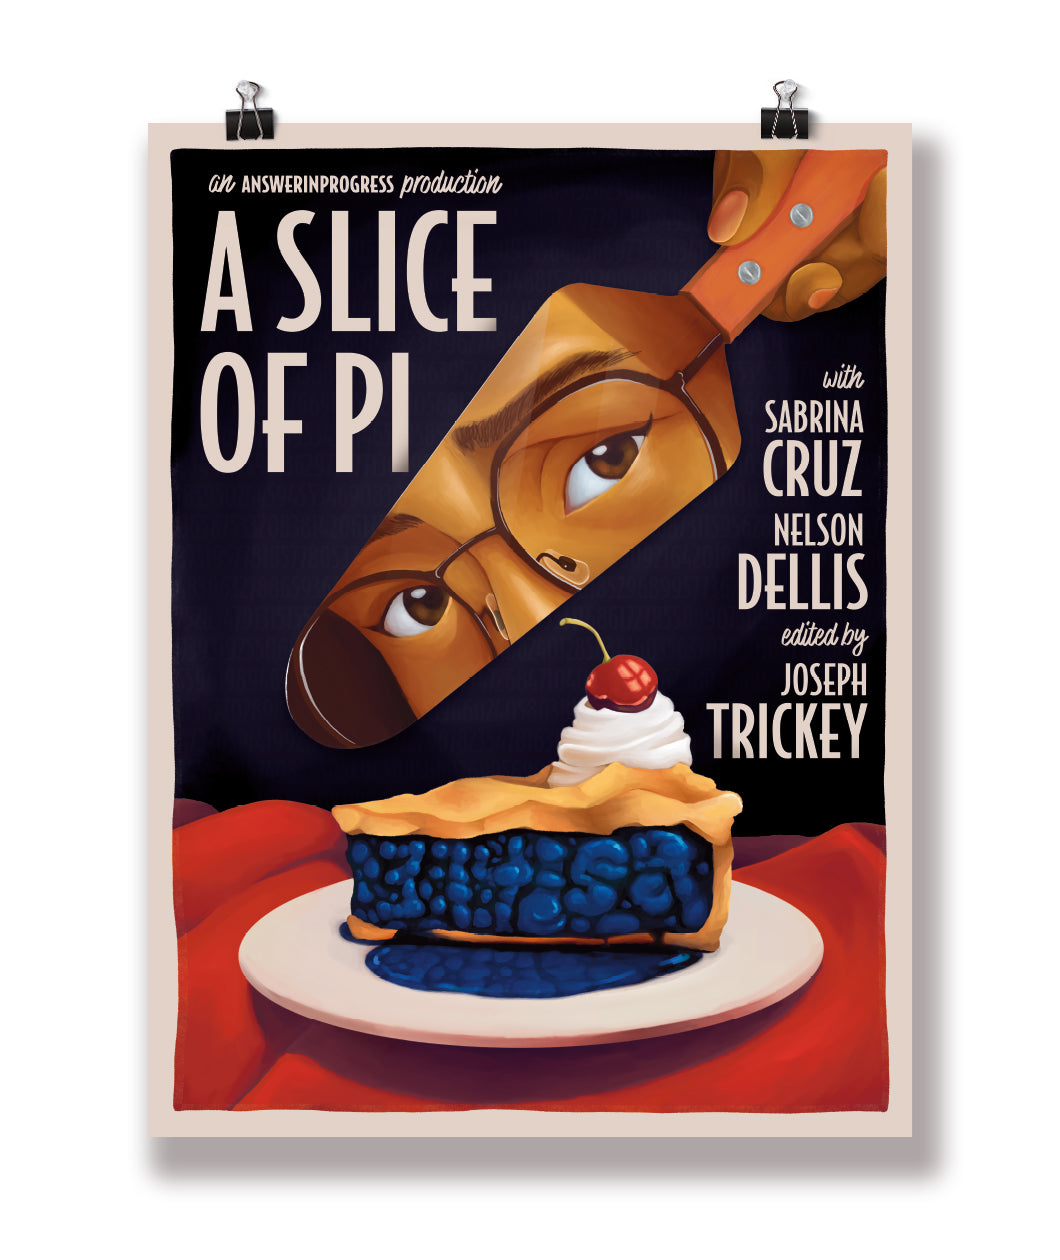 A vertical poster with an illustration of a slice of blueberry pie on a white plate, on a red tablecloth. There is a spatula that is about to cut into the pie that has the image of a person's eyes wearing glasses. Text on the poster reads 